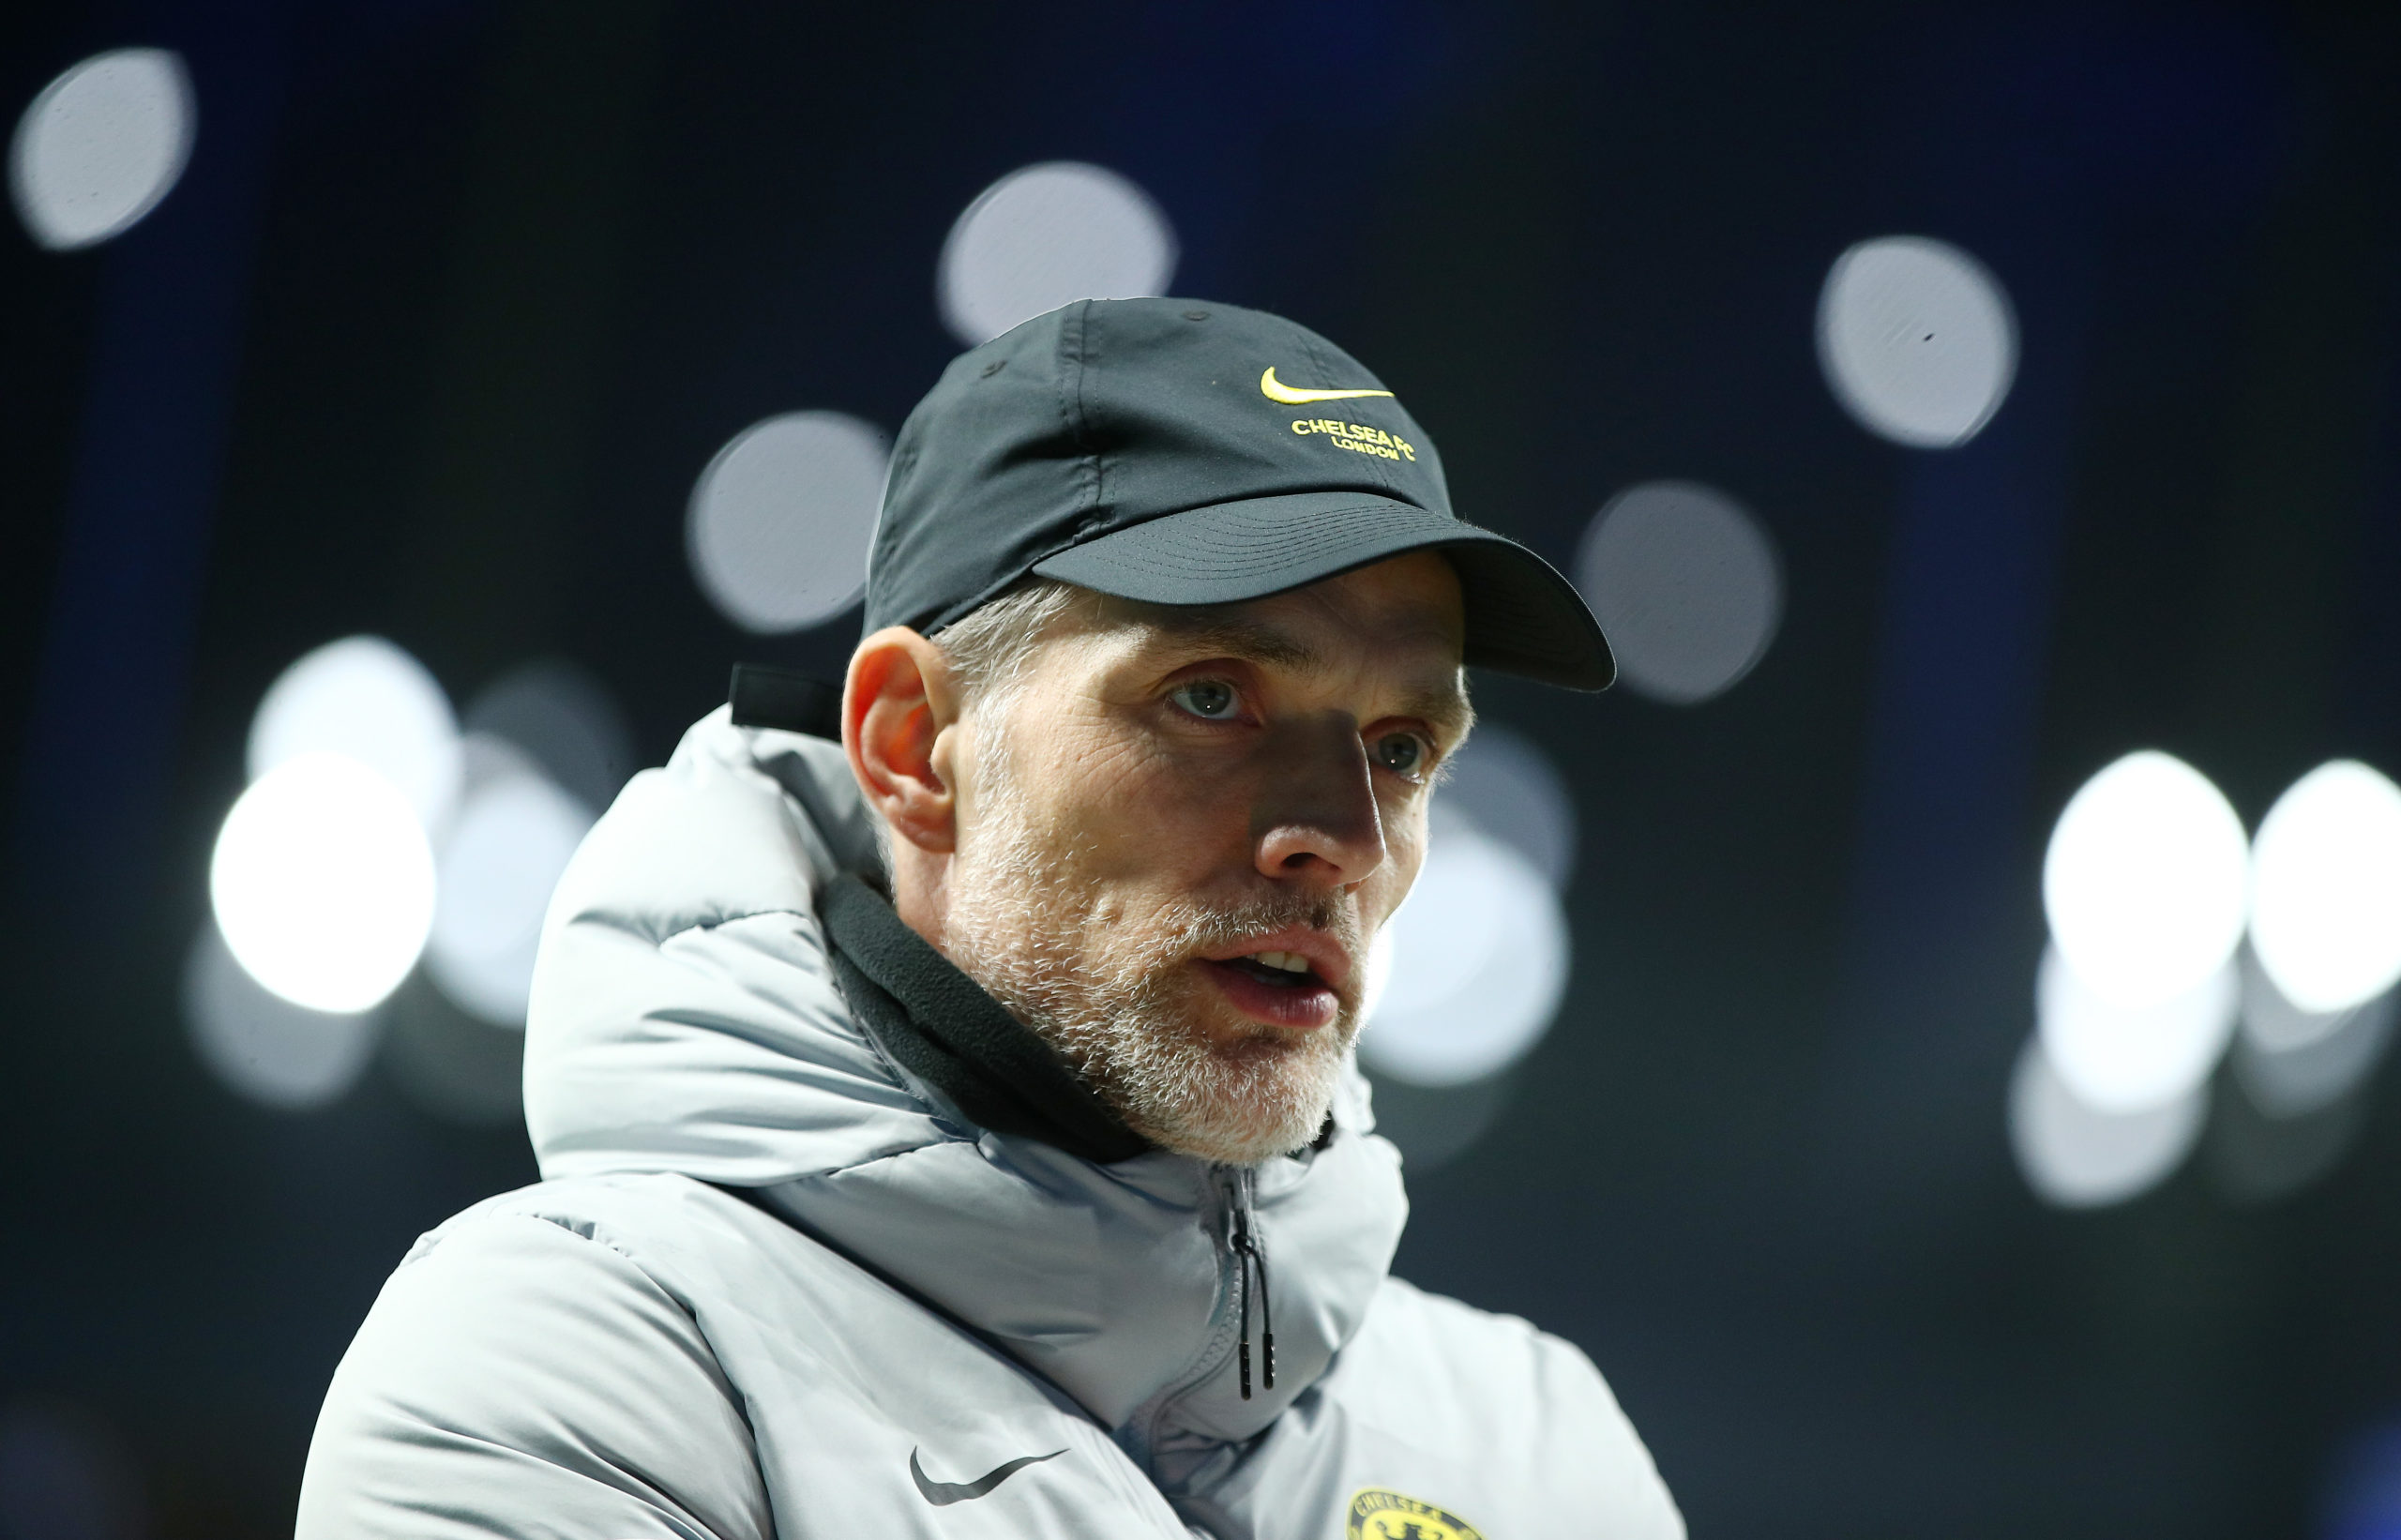 Tuchel insists 25-year-old does not need to leave Chelsea in January amid reported interest